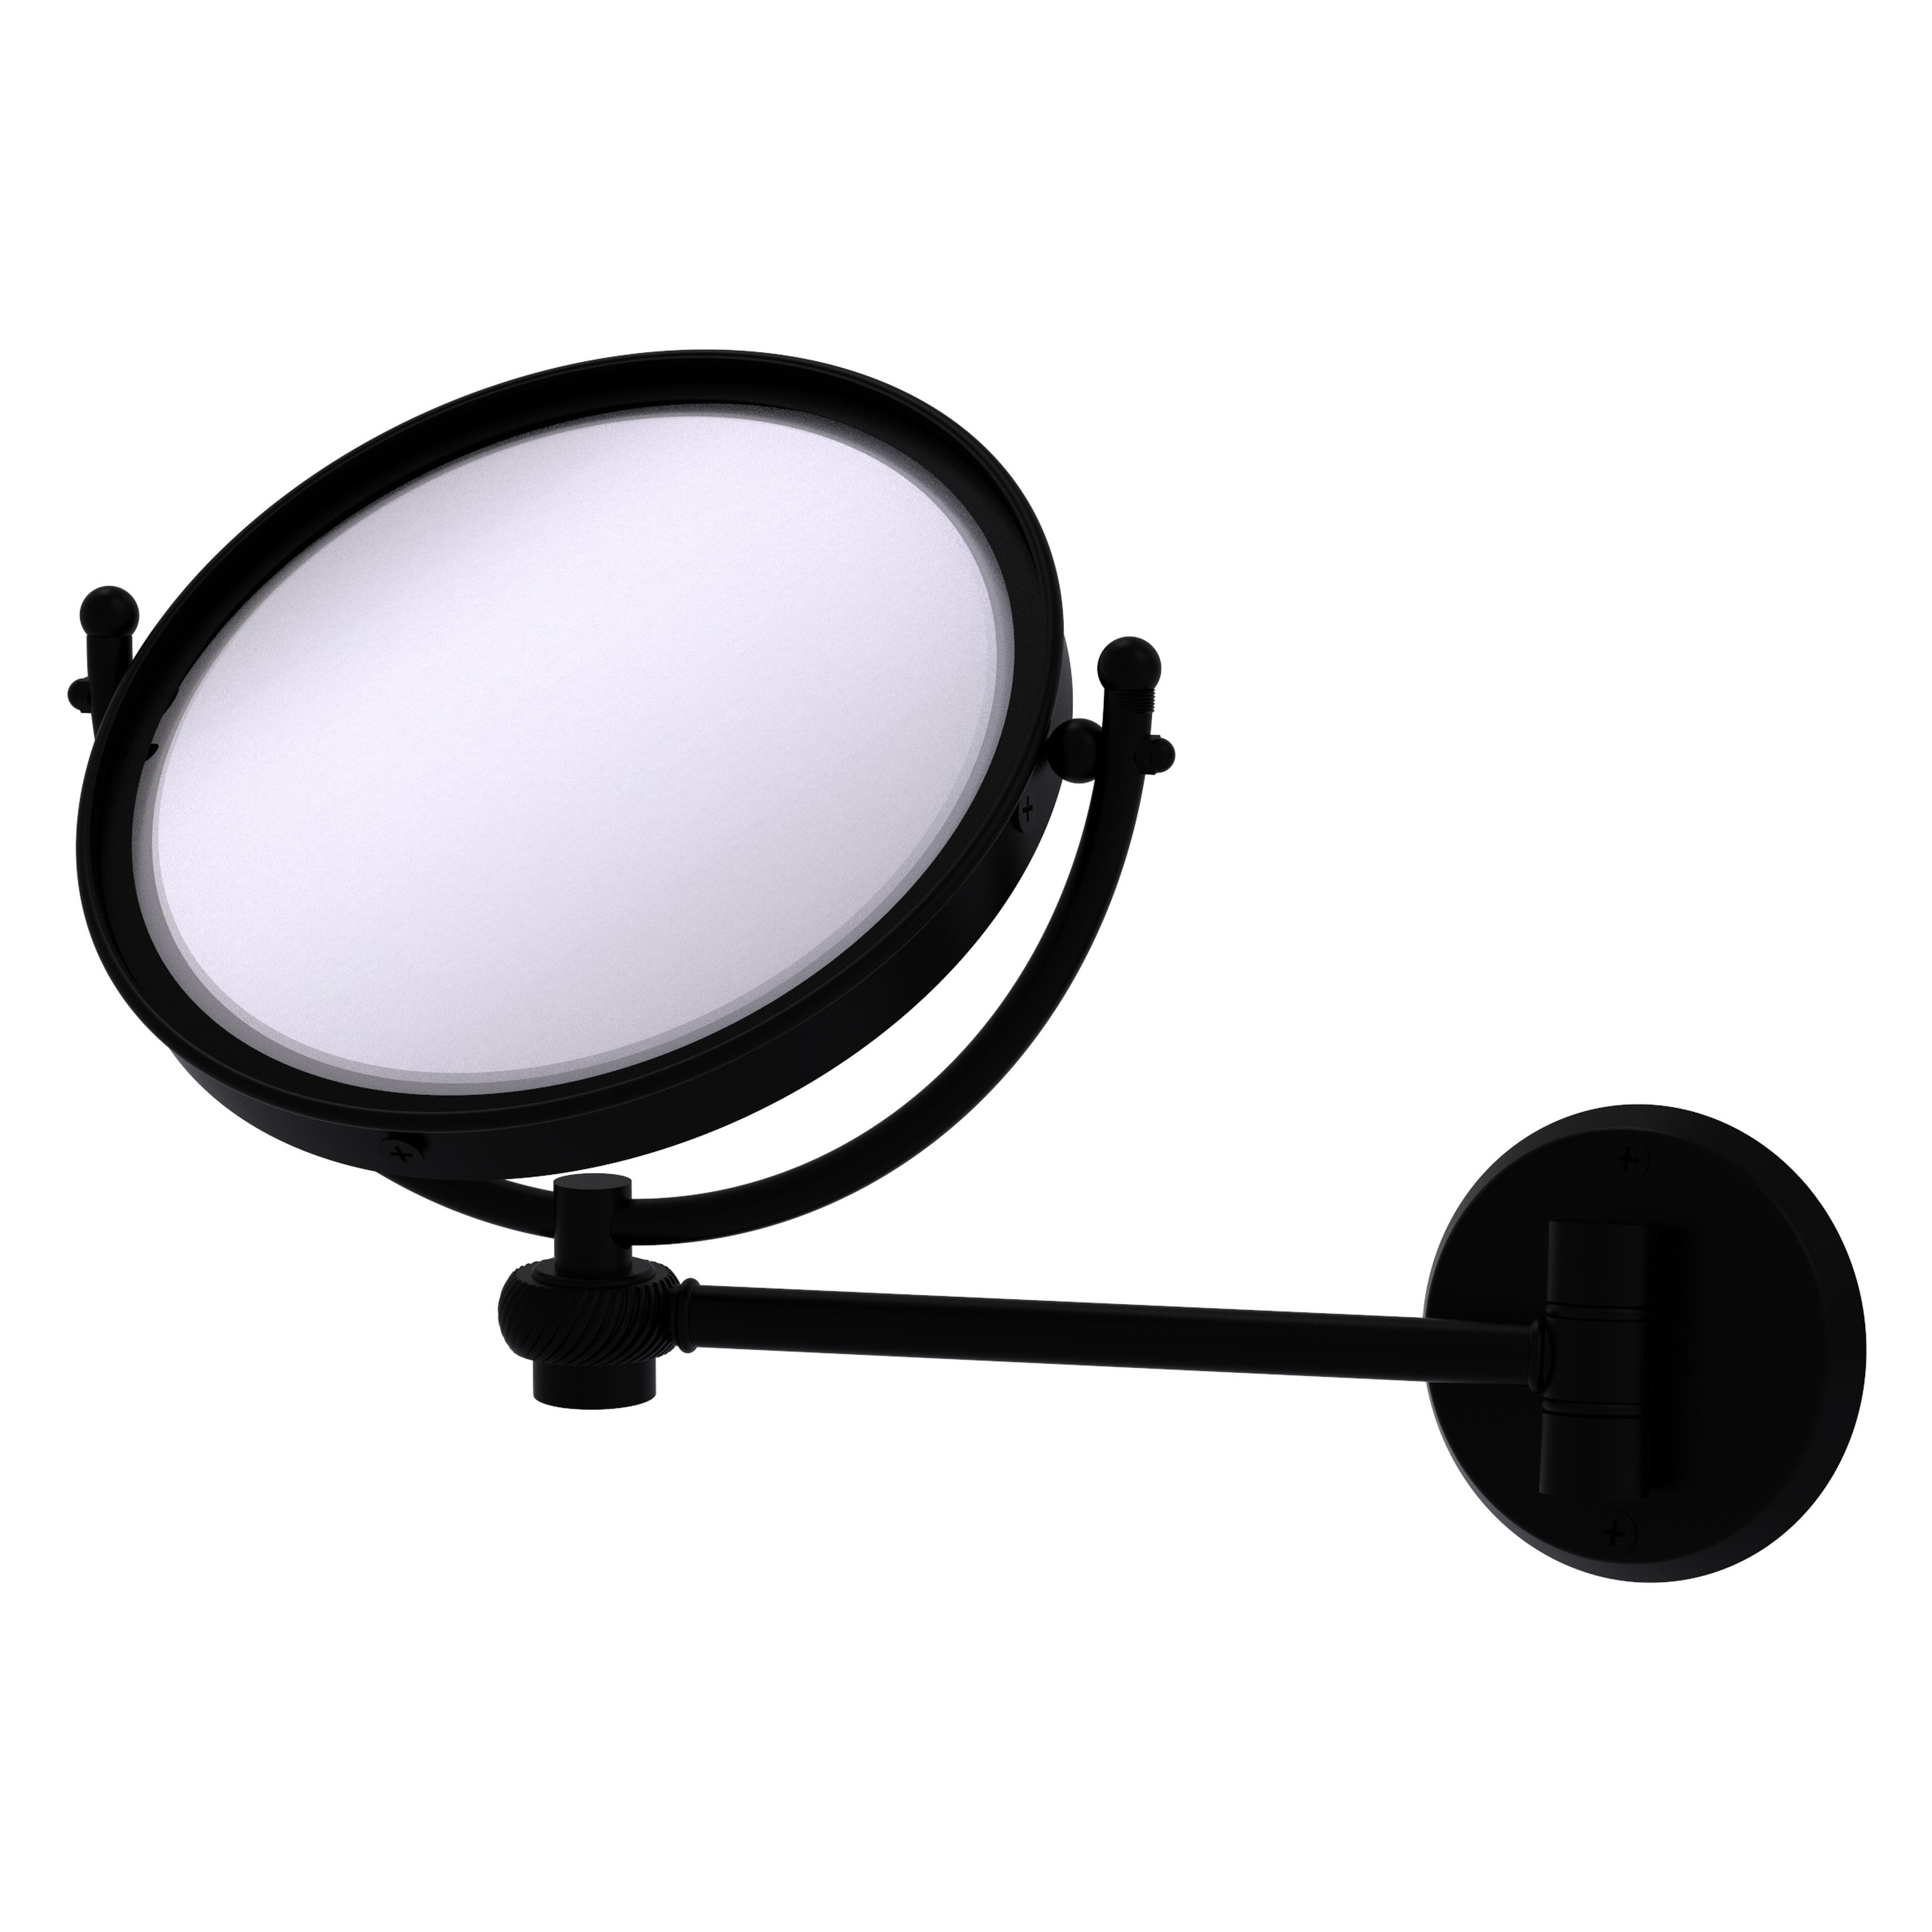 8-in x 10-in Matte Gray Double-sided 3X Magnifying Wall-mounted Vanity Mirror | - Allied Brass WM-5T/3X-BKM